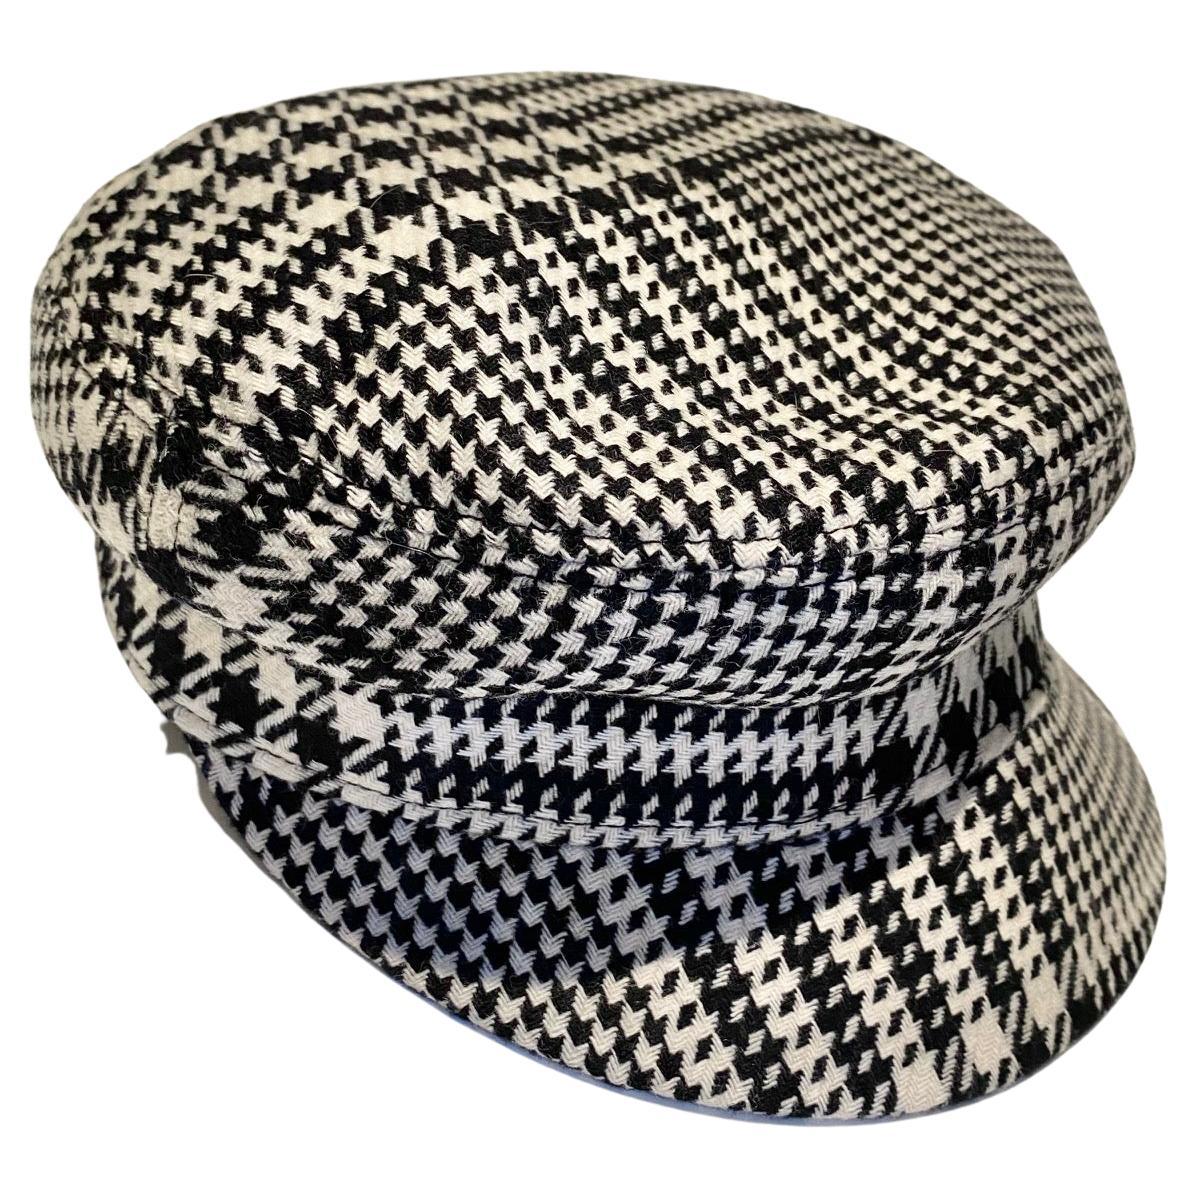 1990s Gianni Versace Black and White Houndstooth Flat Cap For Sale